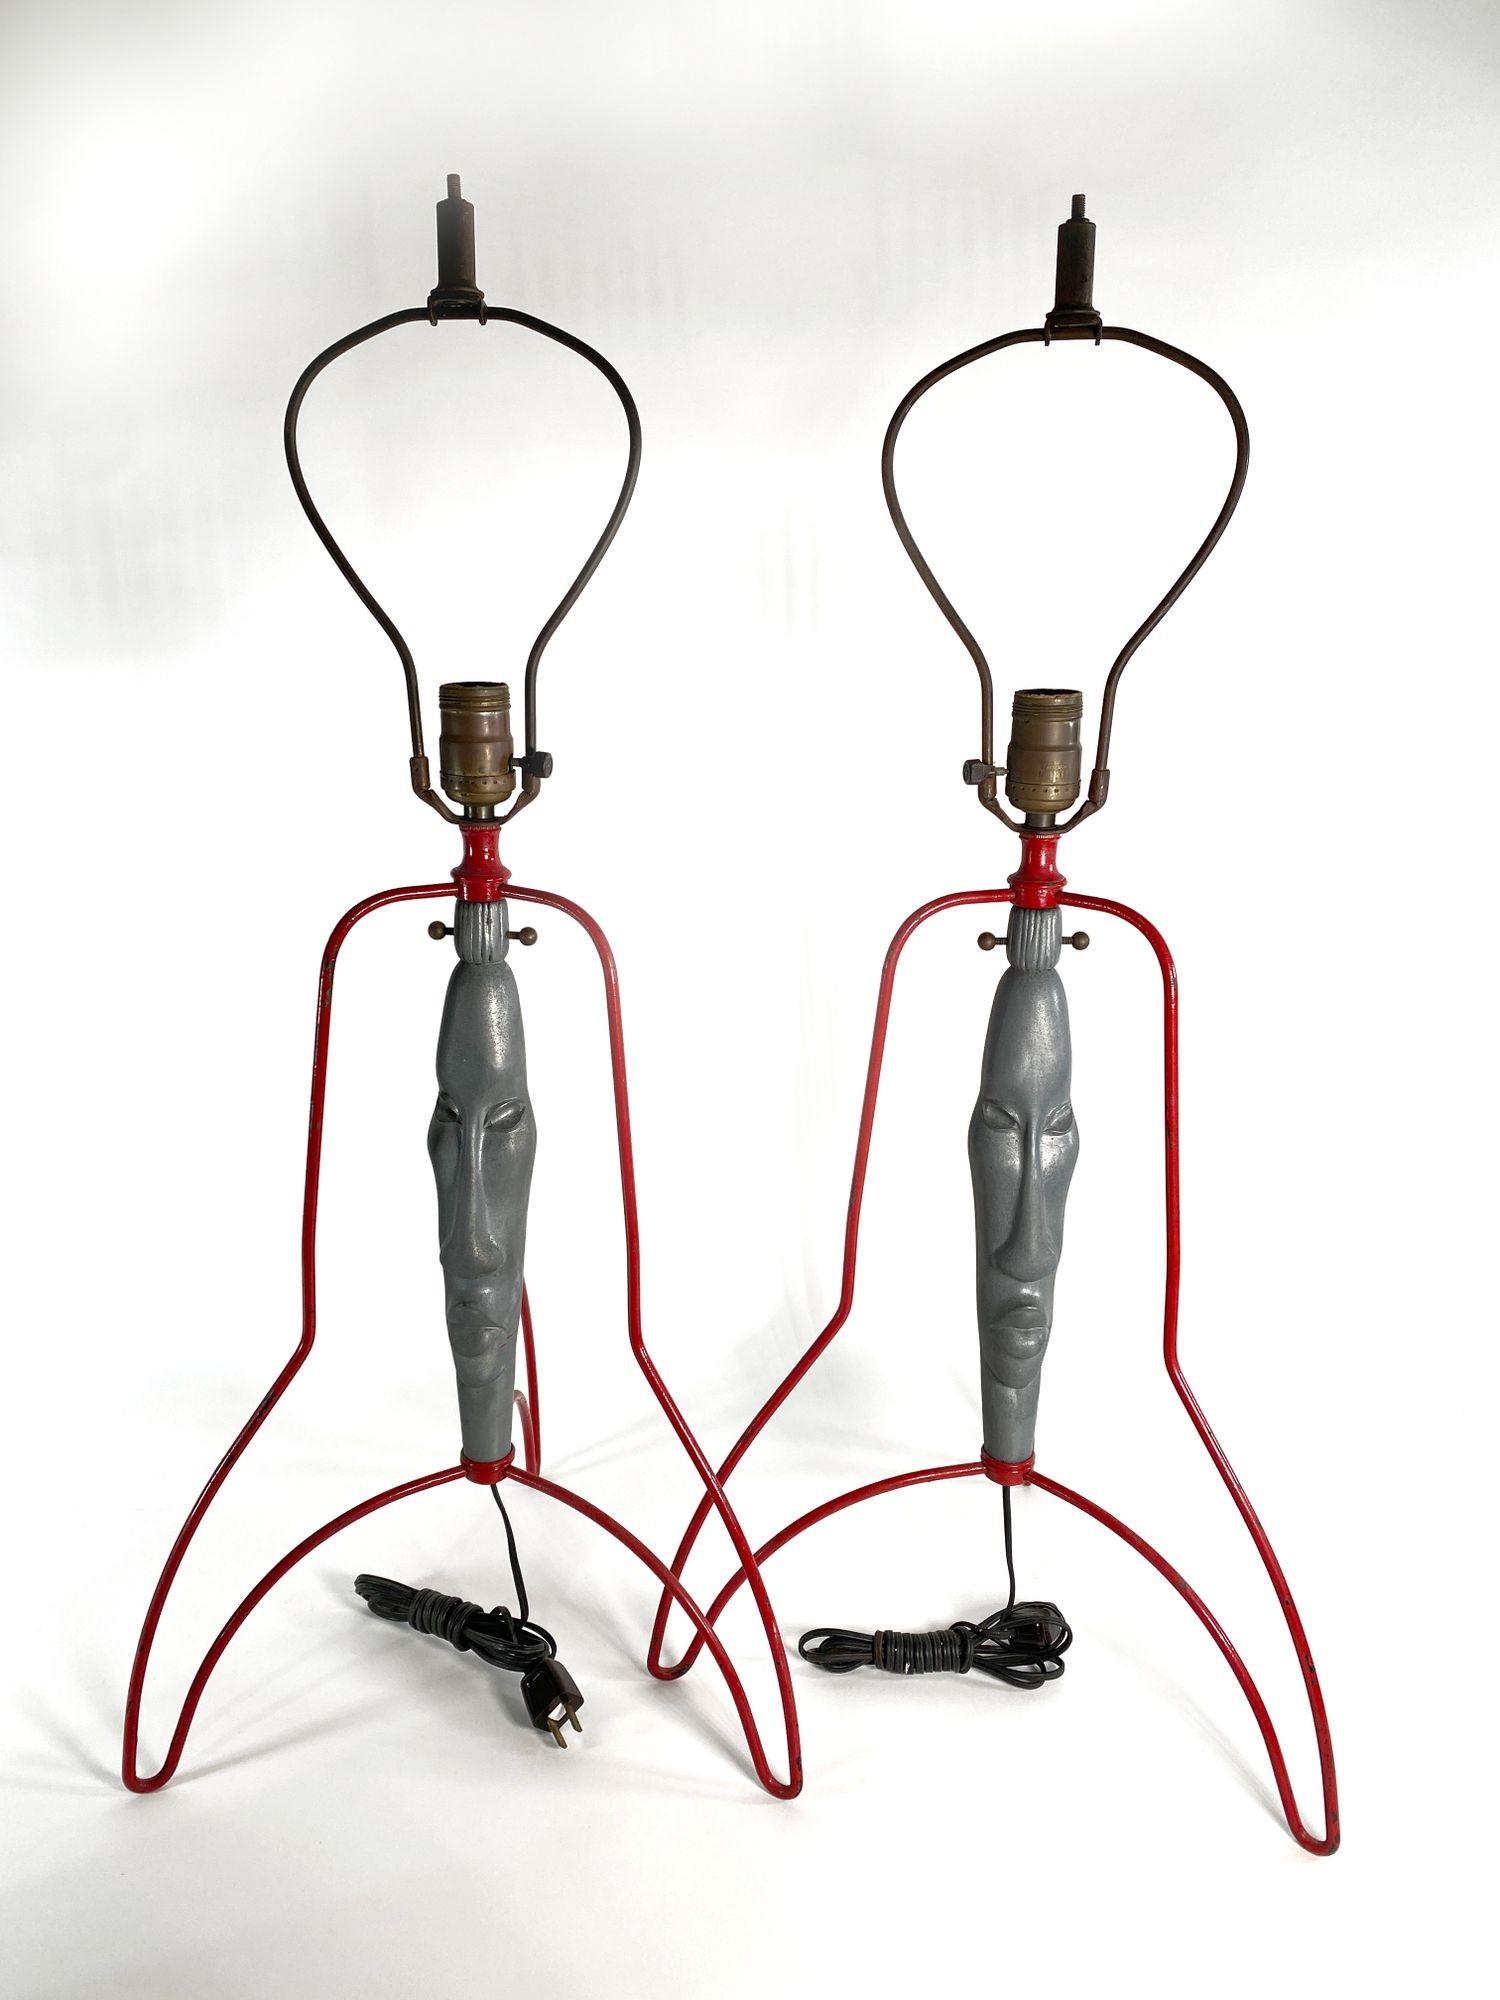 Pair of lamps. The cast faces surrounded by enameled wire supports, evocative of an atomic era spaceship. Original wiring.
Frederick Weinberg was a Philadelphia based artist (1950s) commonly known for his wire and metal sculptures and functional